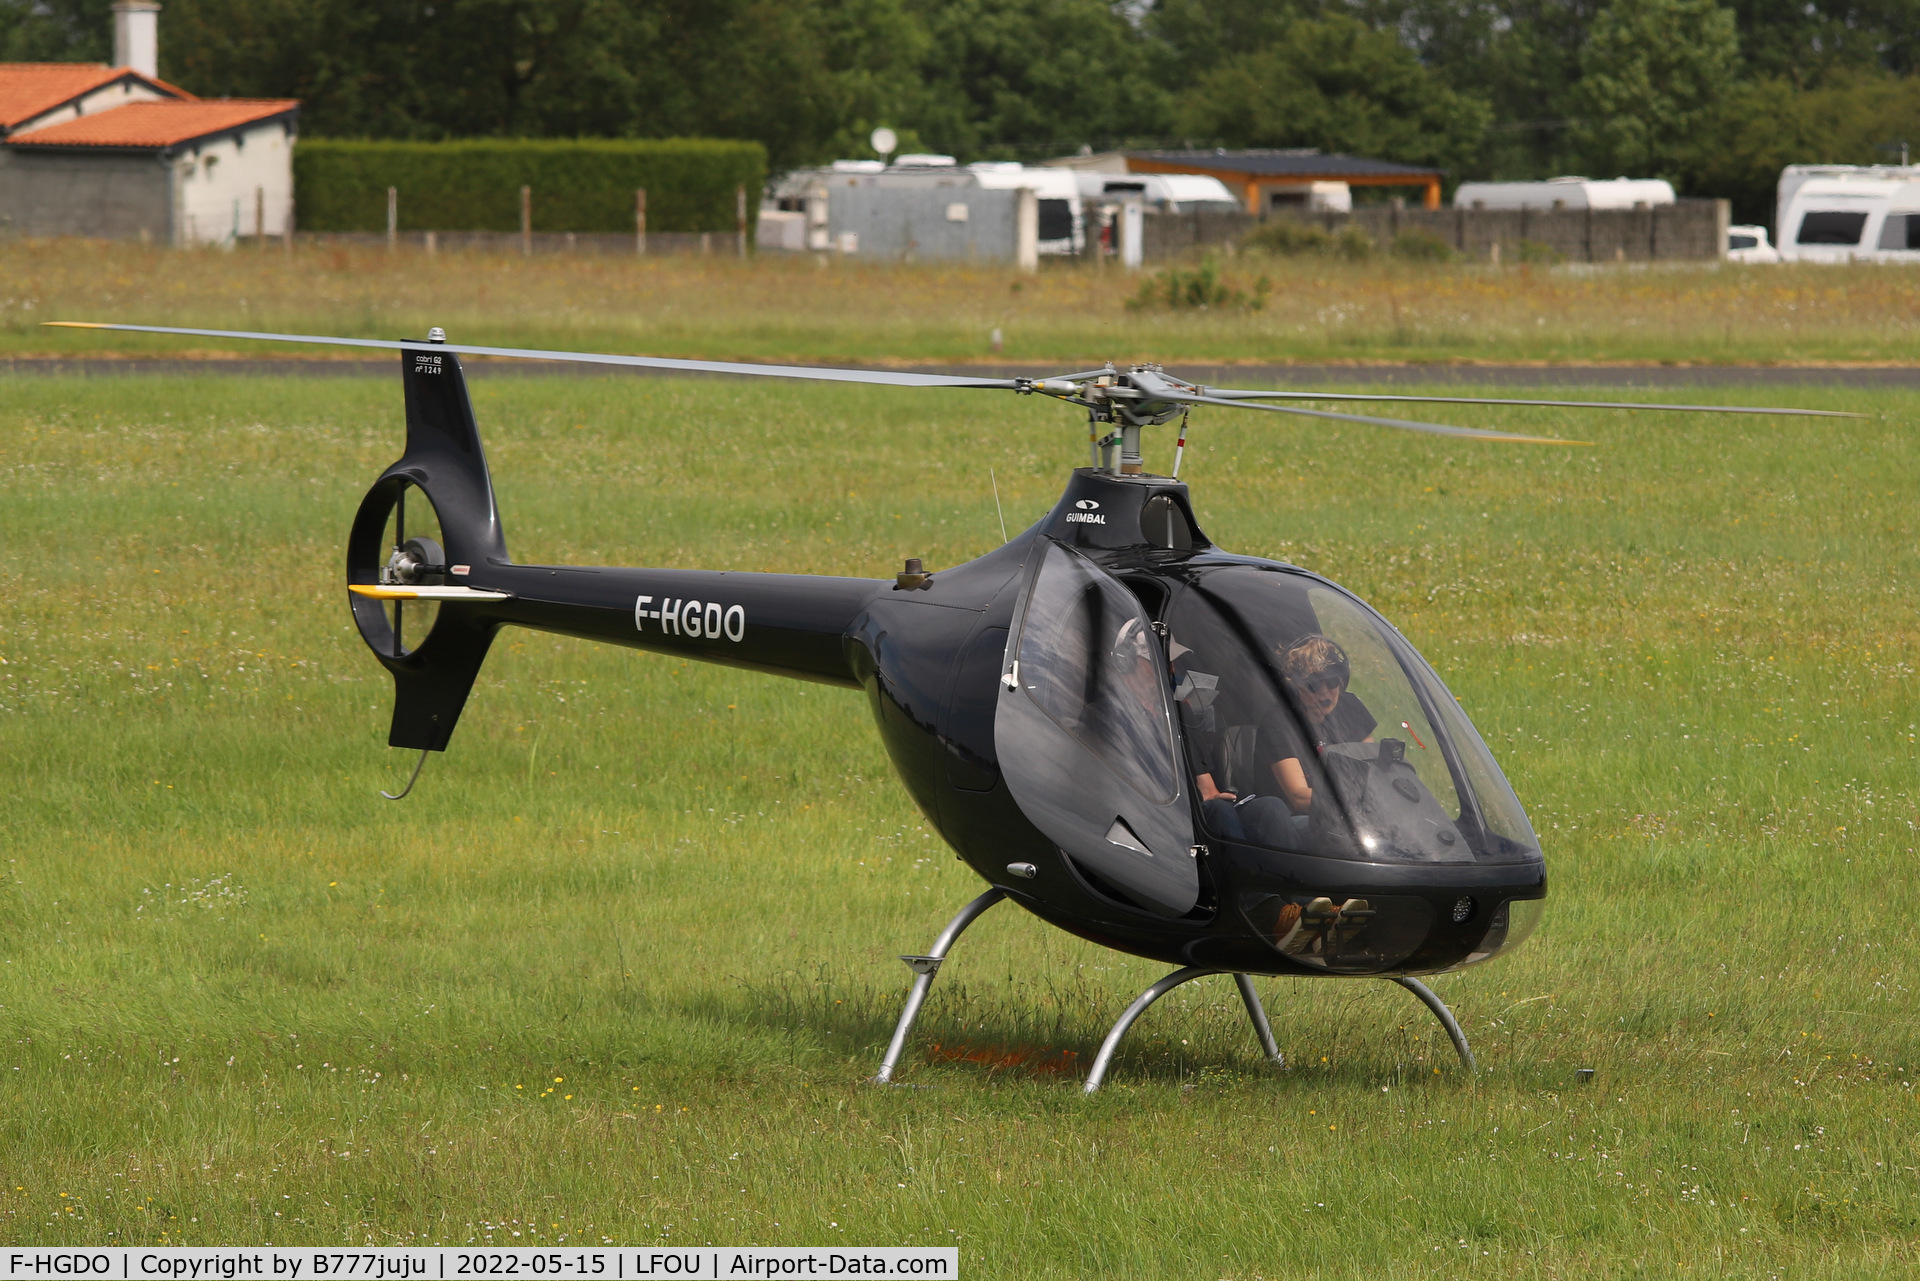 F-HGDO, 2021 Guimbal Cabri G2 C/N 1249, at Helico 2022 Cholet